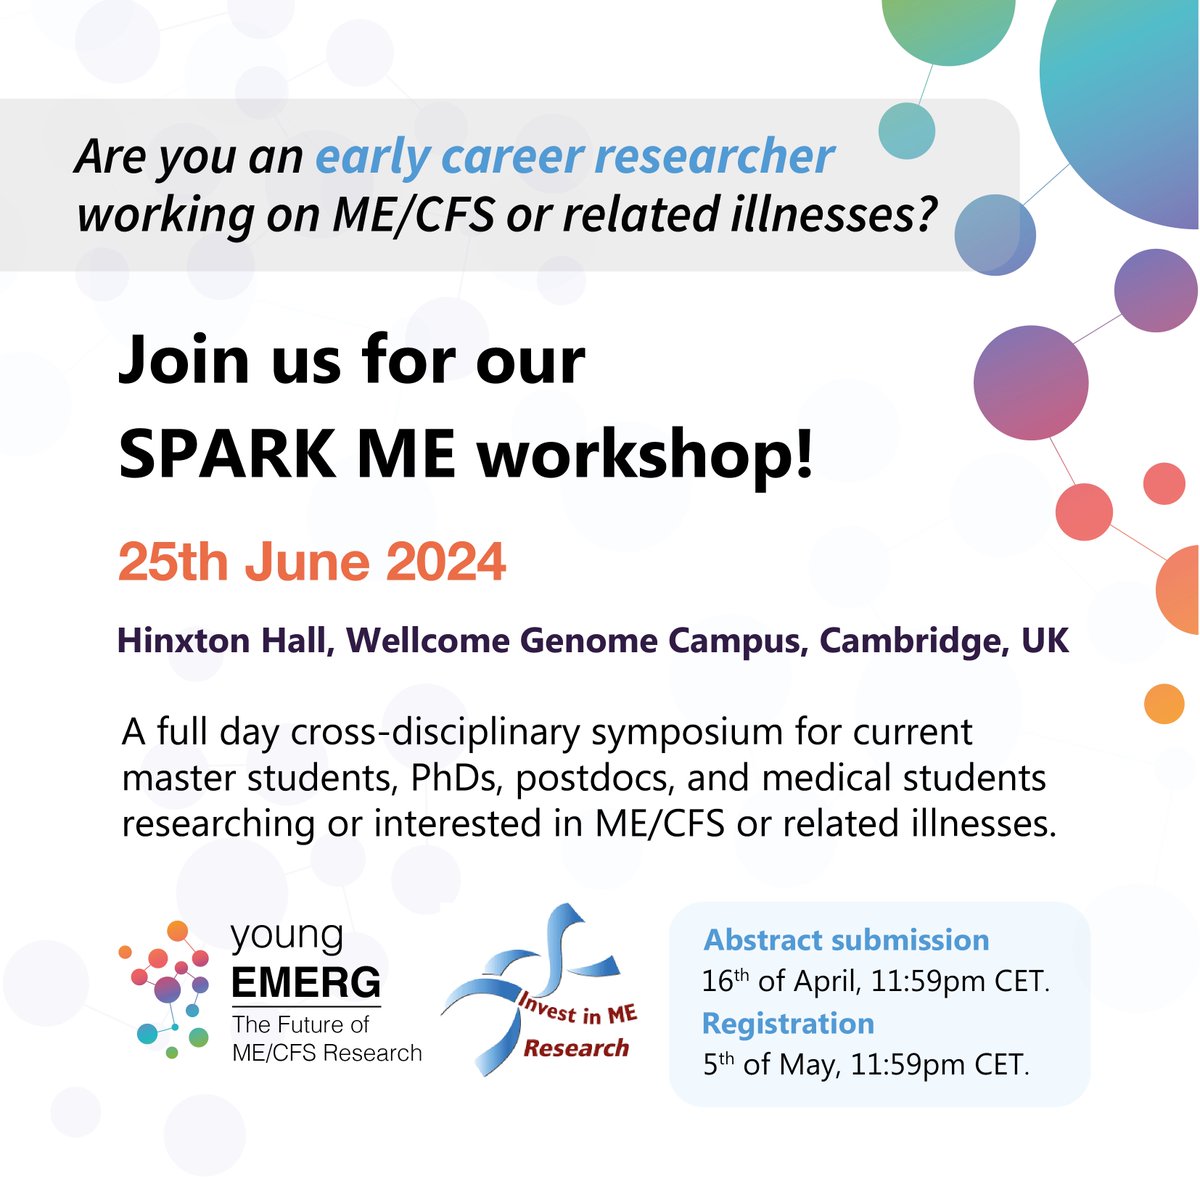 📢#SPARKME update! New deadline for abstract submissions are on the 16th of April🗓️ Don't miss the opportunity to showcase your work and learn about #MECFS and related illnesses. @euromeresearch @Invest_in_ME @EUROMEALL Info: europeanmeresearch.org/yemerg04.shtml